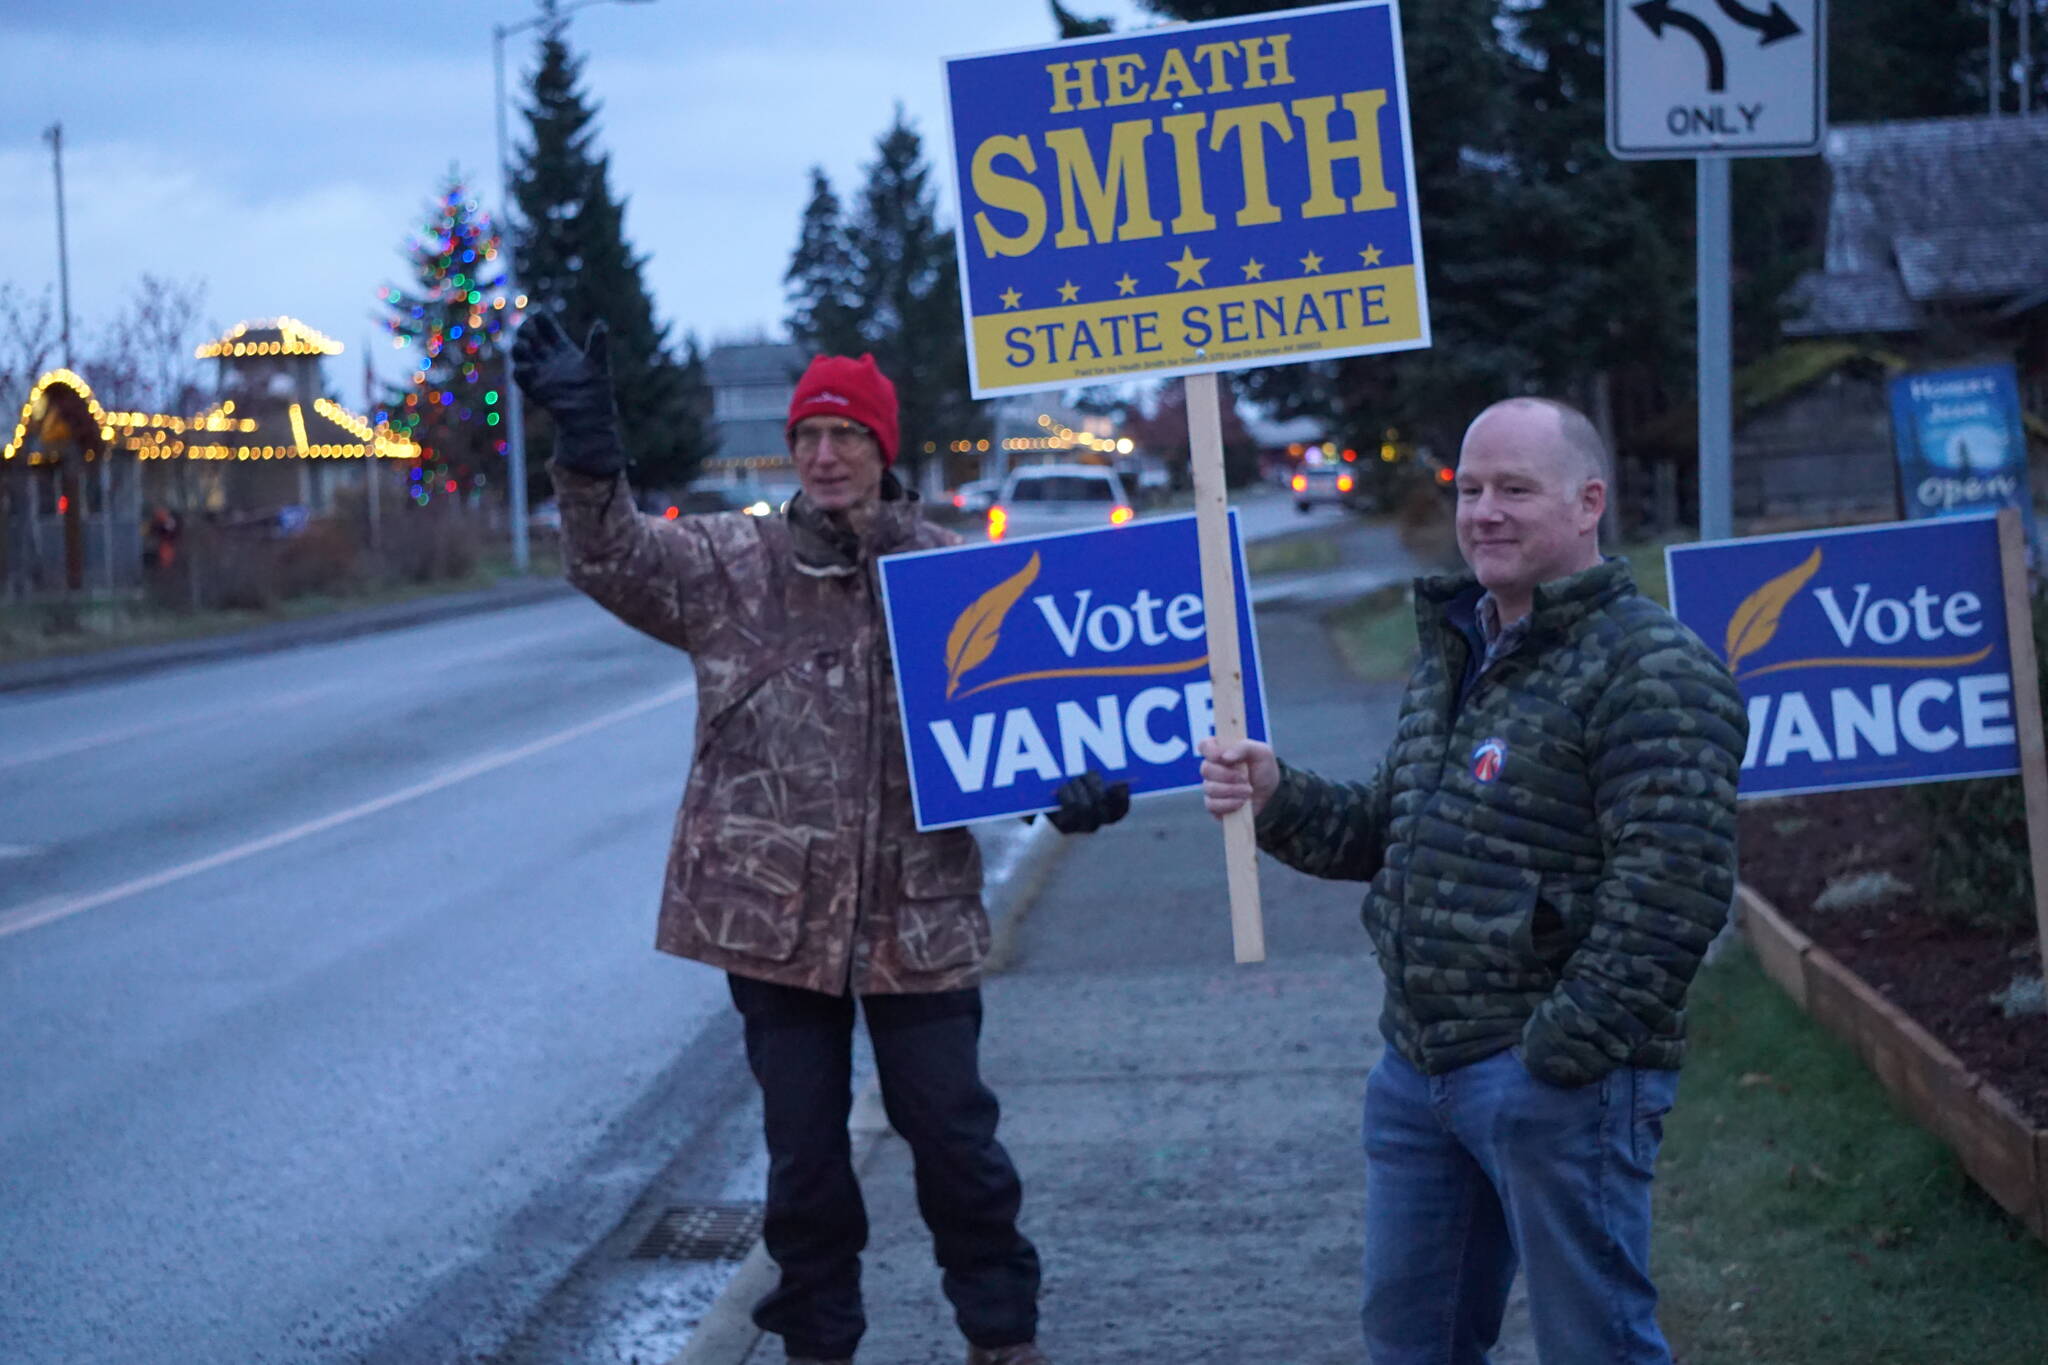 Heath Smith, right, Candidate for State Senate District C, waves signs on Tuesday, Nov. 8, 2022, on Pioneer Avenue in Homer, Alaska. At left, Charlie Franz shows his support for Rep. Sarah Vance, running for re-election and for the new District 6. (Photo by Michael Armstrong/Homer News)